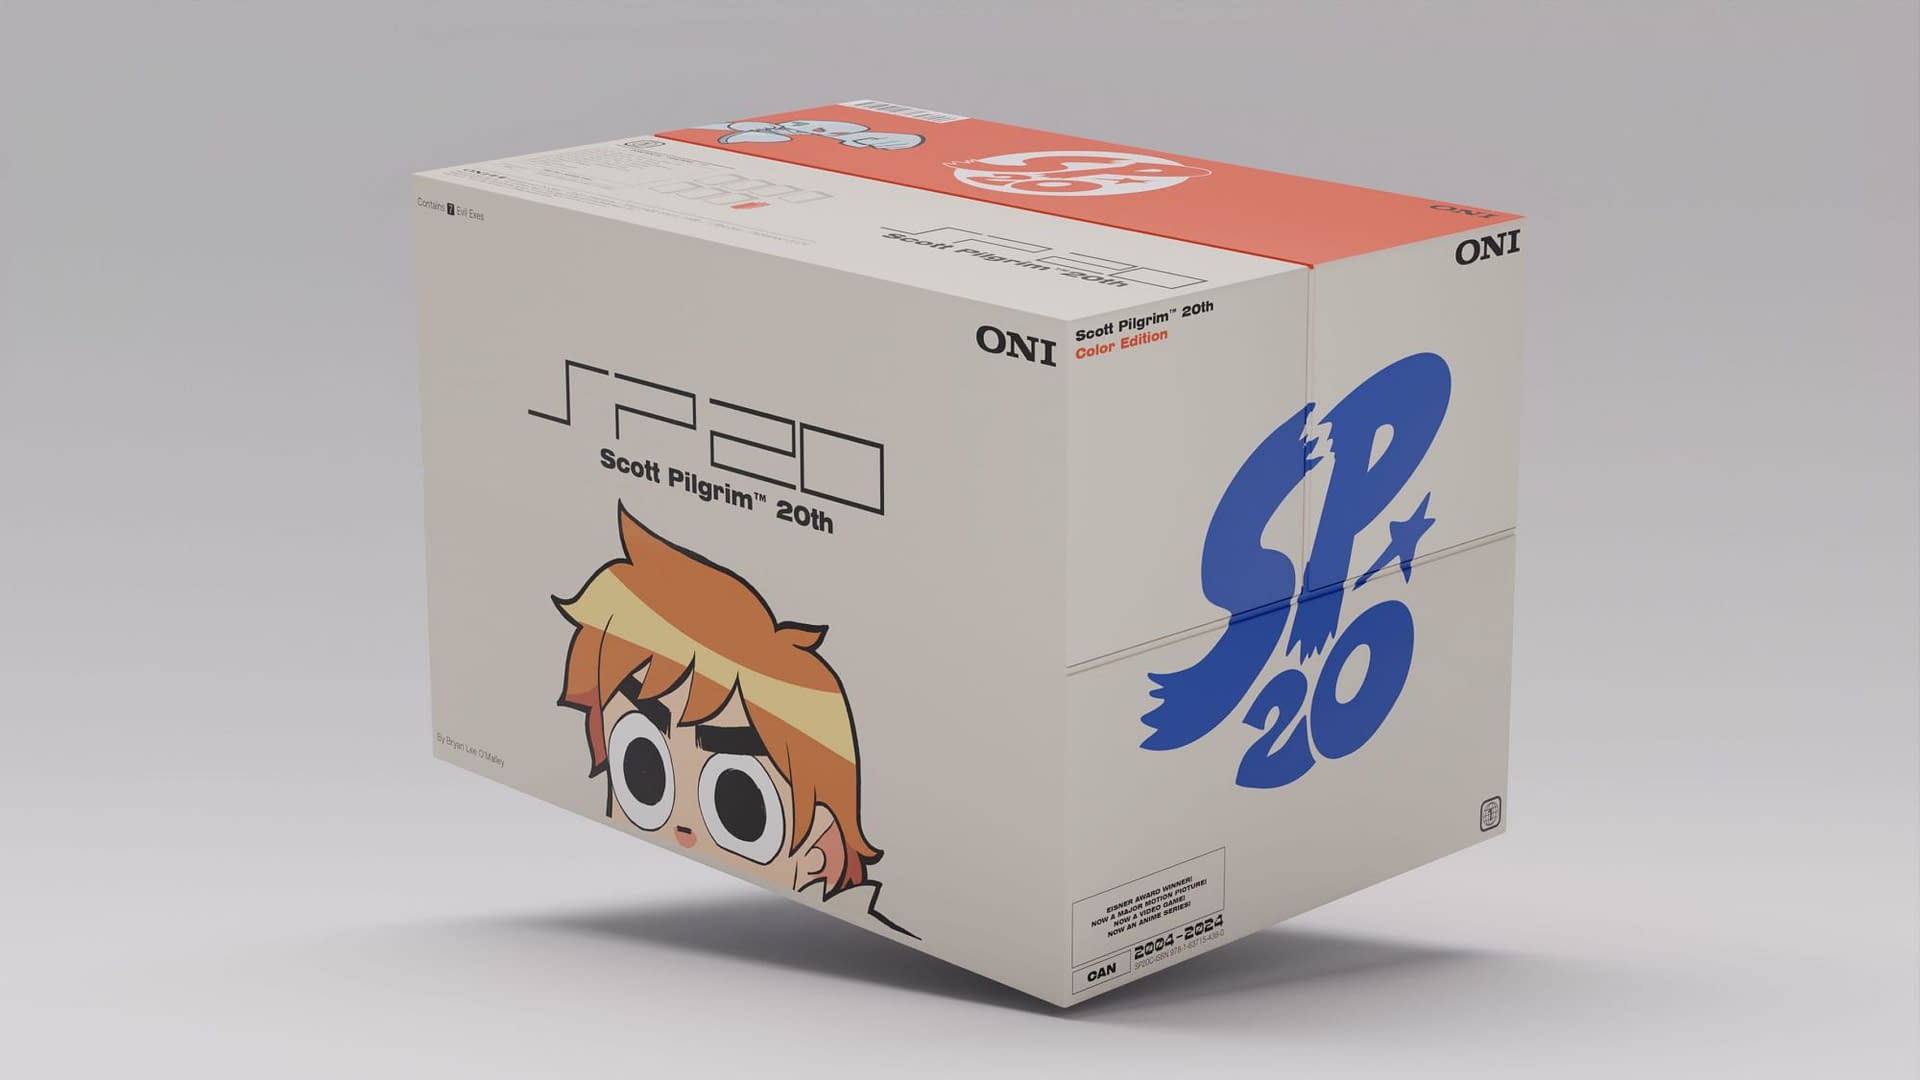 A Look Inside Scott Pilgrim's 20th Anniversary Boxes Launches